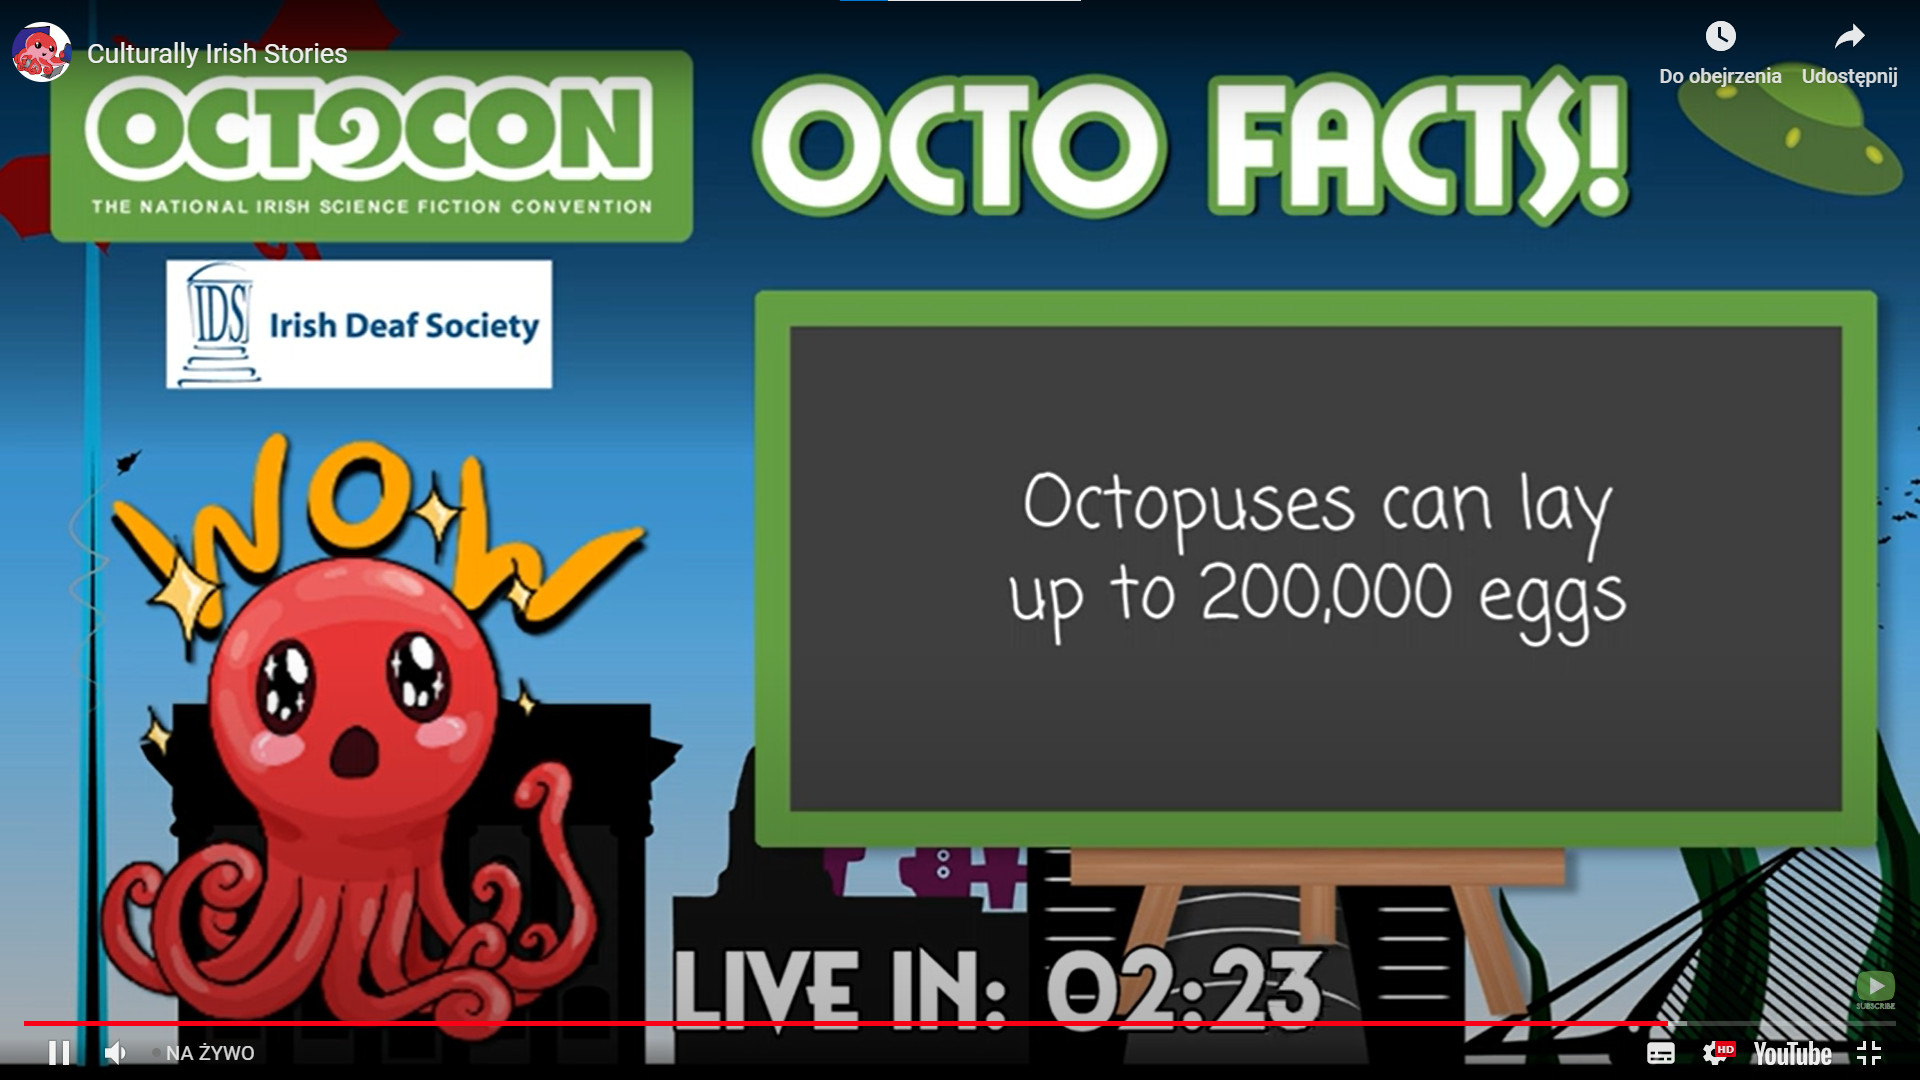 A screen from TouTube. It shows convention logo  and the title 'Octo Facts!'. There is also a logo of Irish Deaf Society. Lower there is an octopus with big eyes and teh text 'WOW' above her head. Next to it there is a box with the fact: 'Octopuses can lay up to 200,000 eggs'.